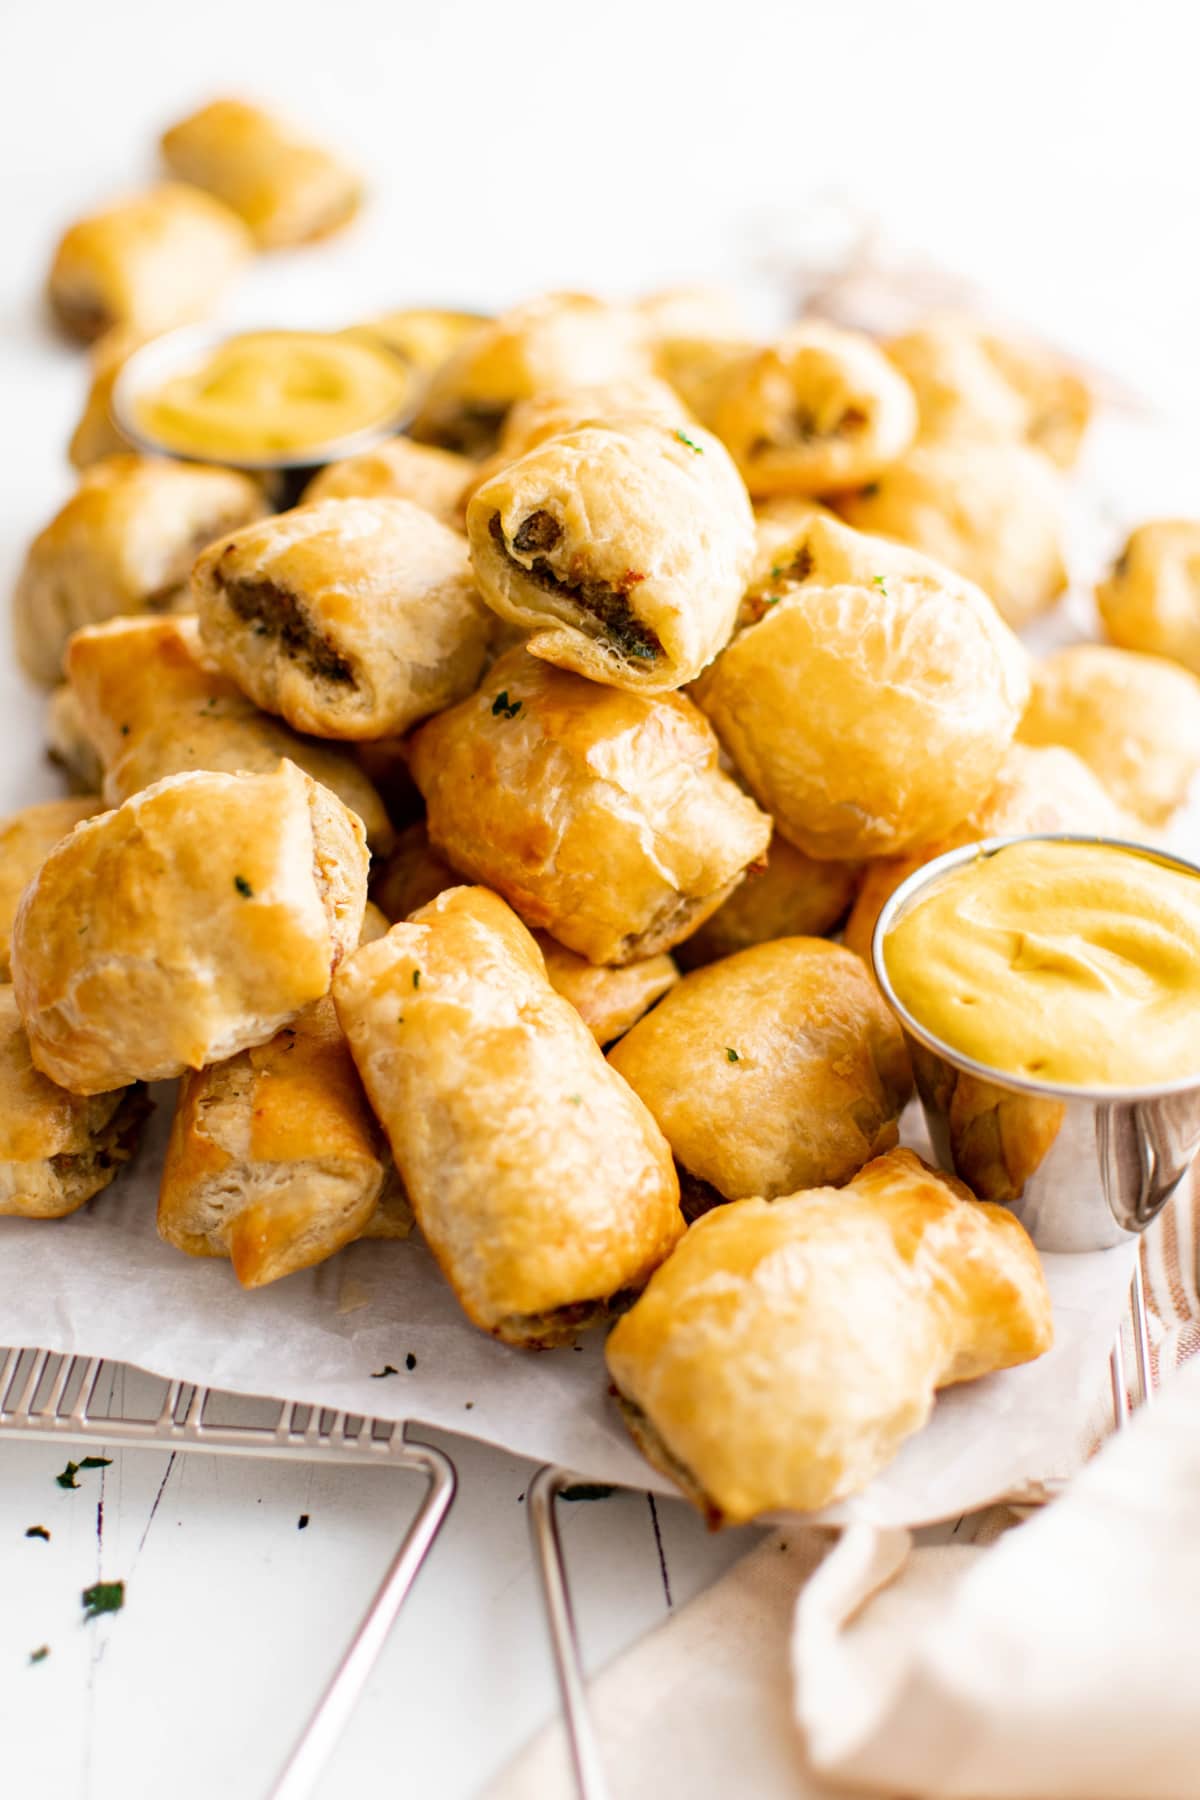 Piles of sausage rolls stacked on a white platter with a small dish of mustard